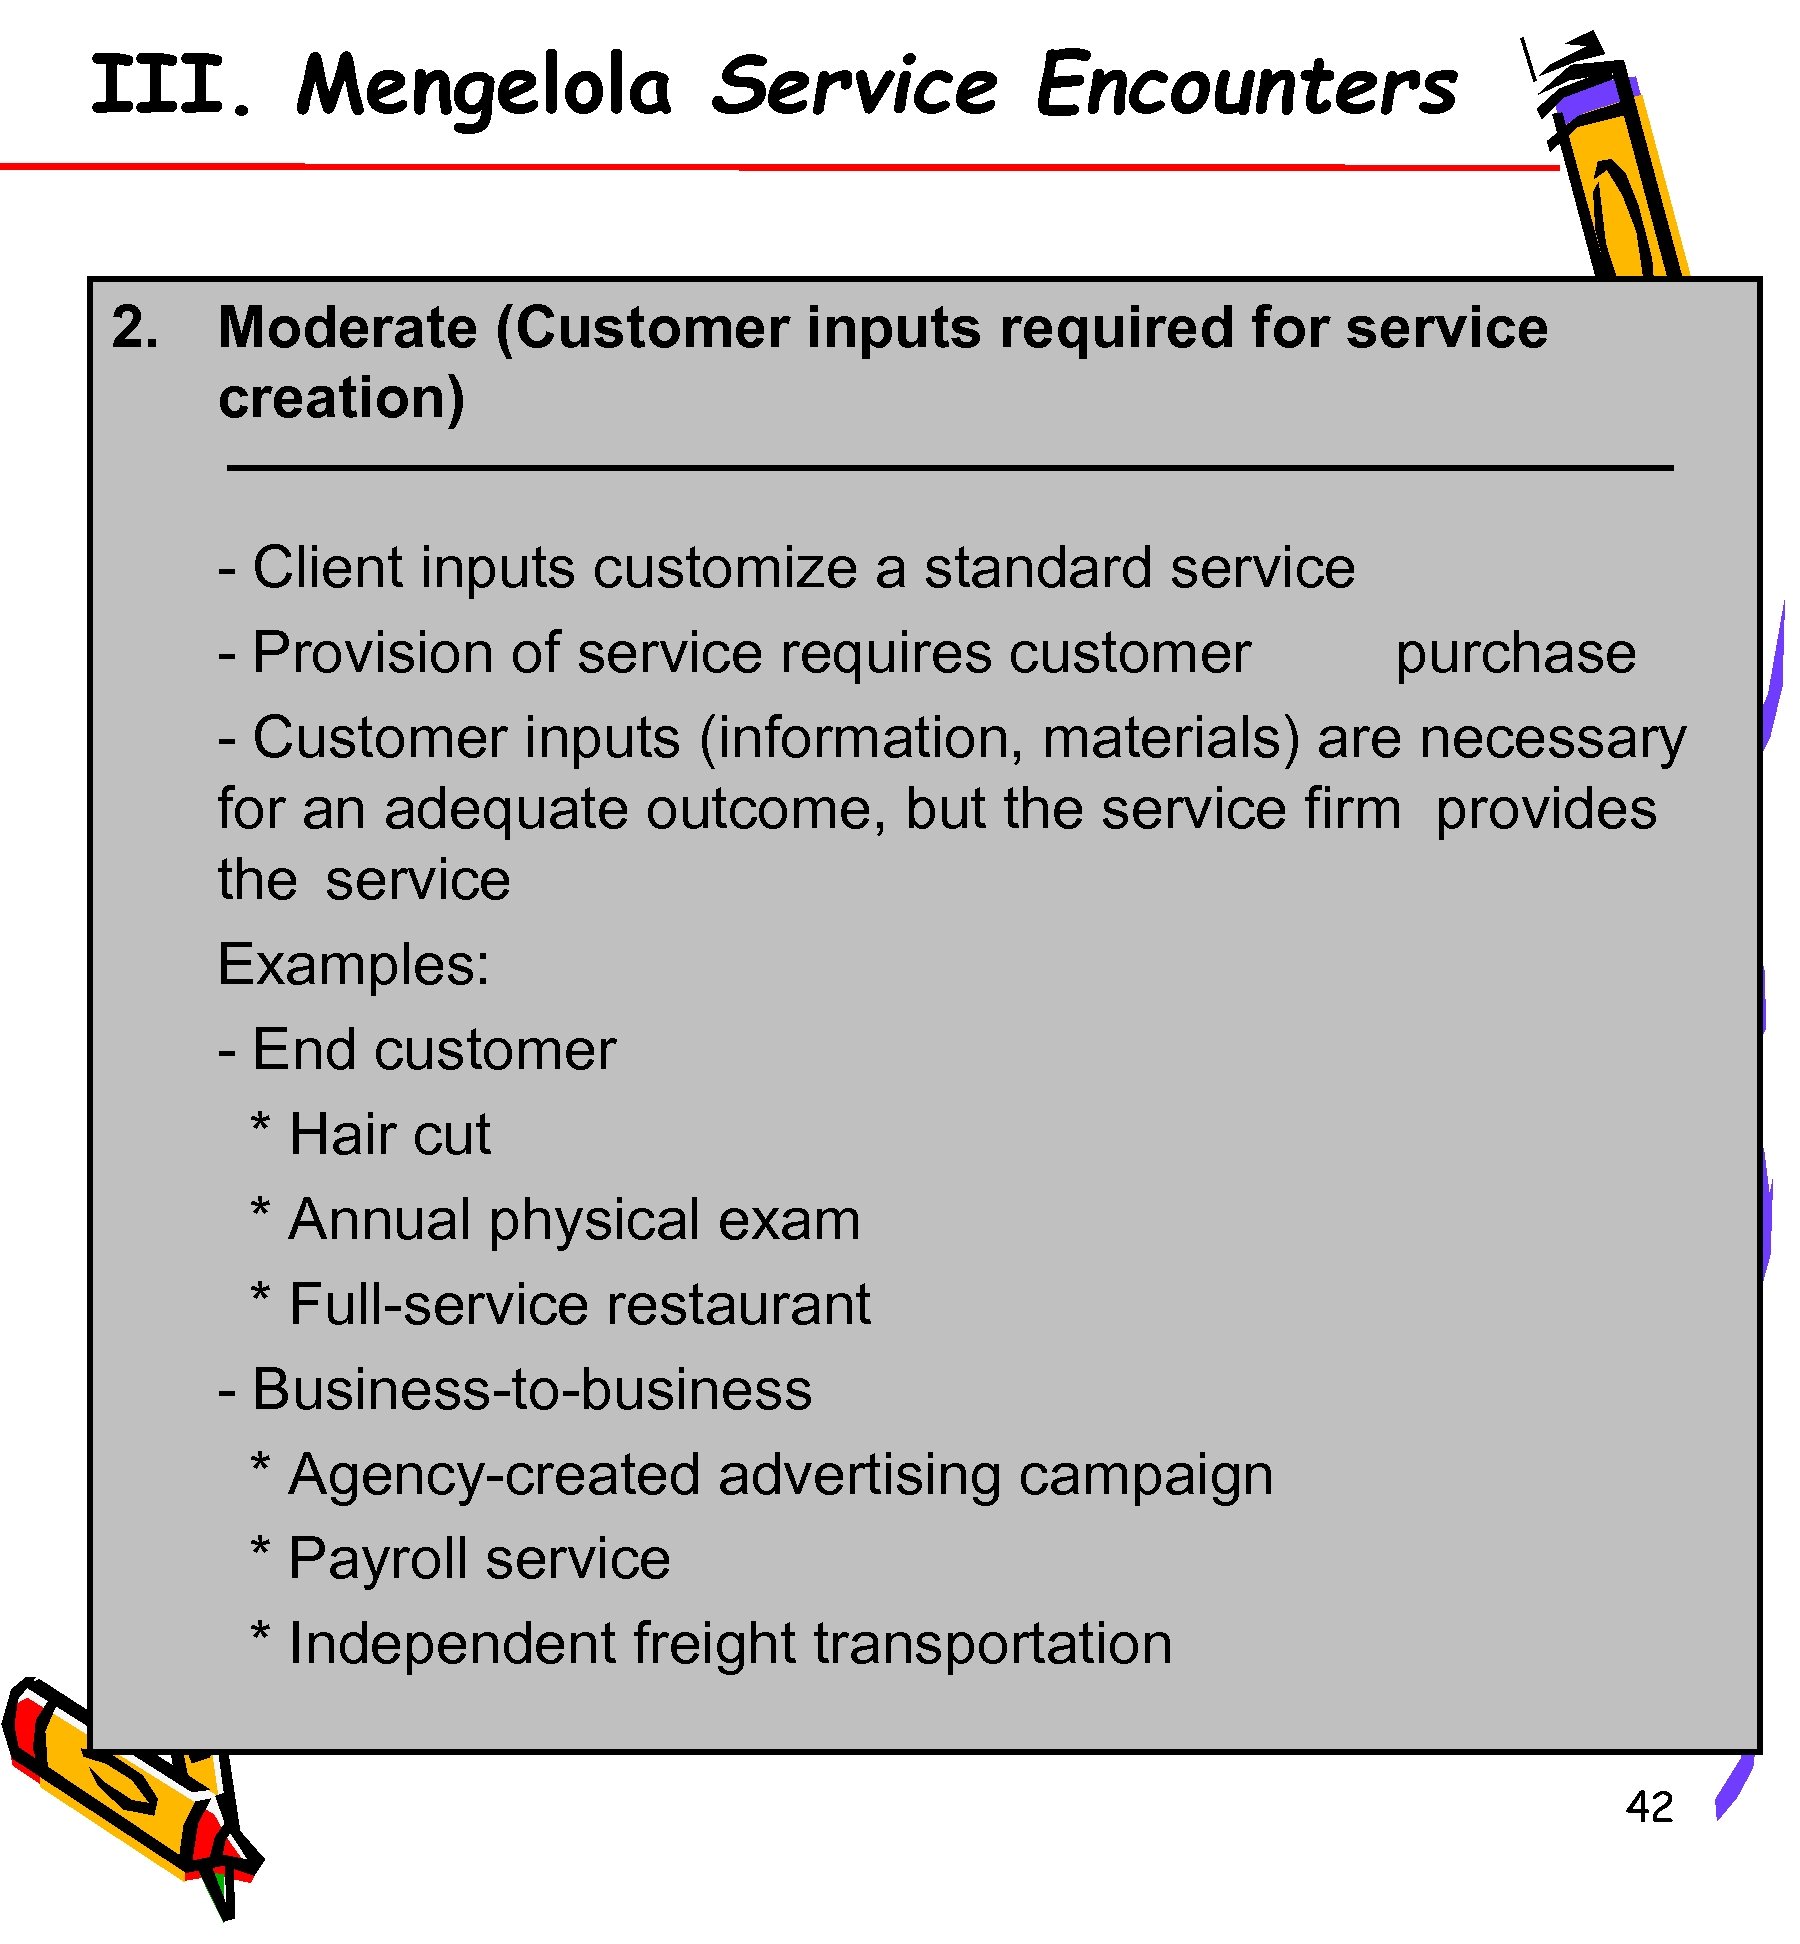 III. Mengelola Service Encounters 2. Moderate (Customer inputs required for service creation) - Client